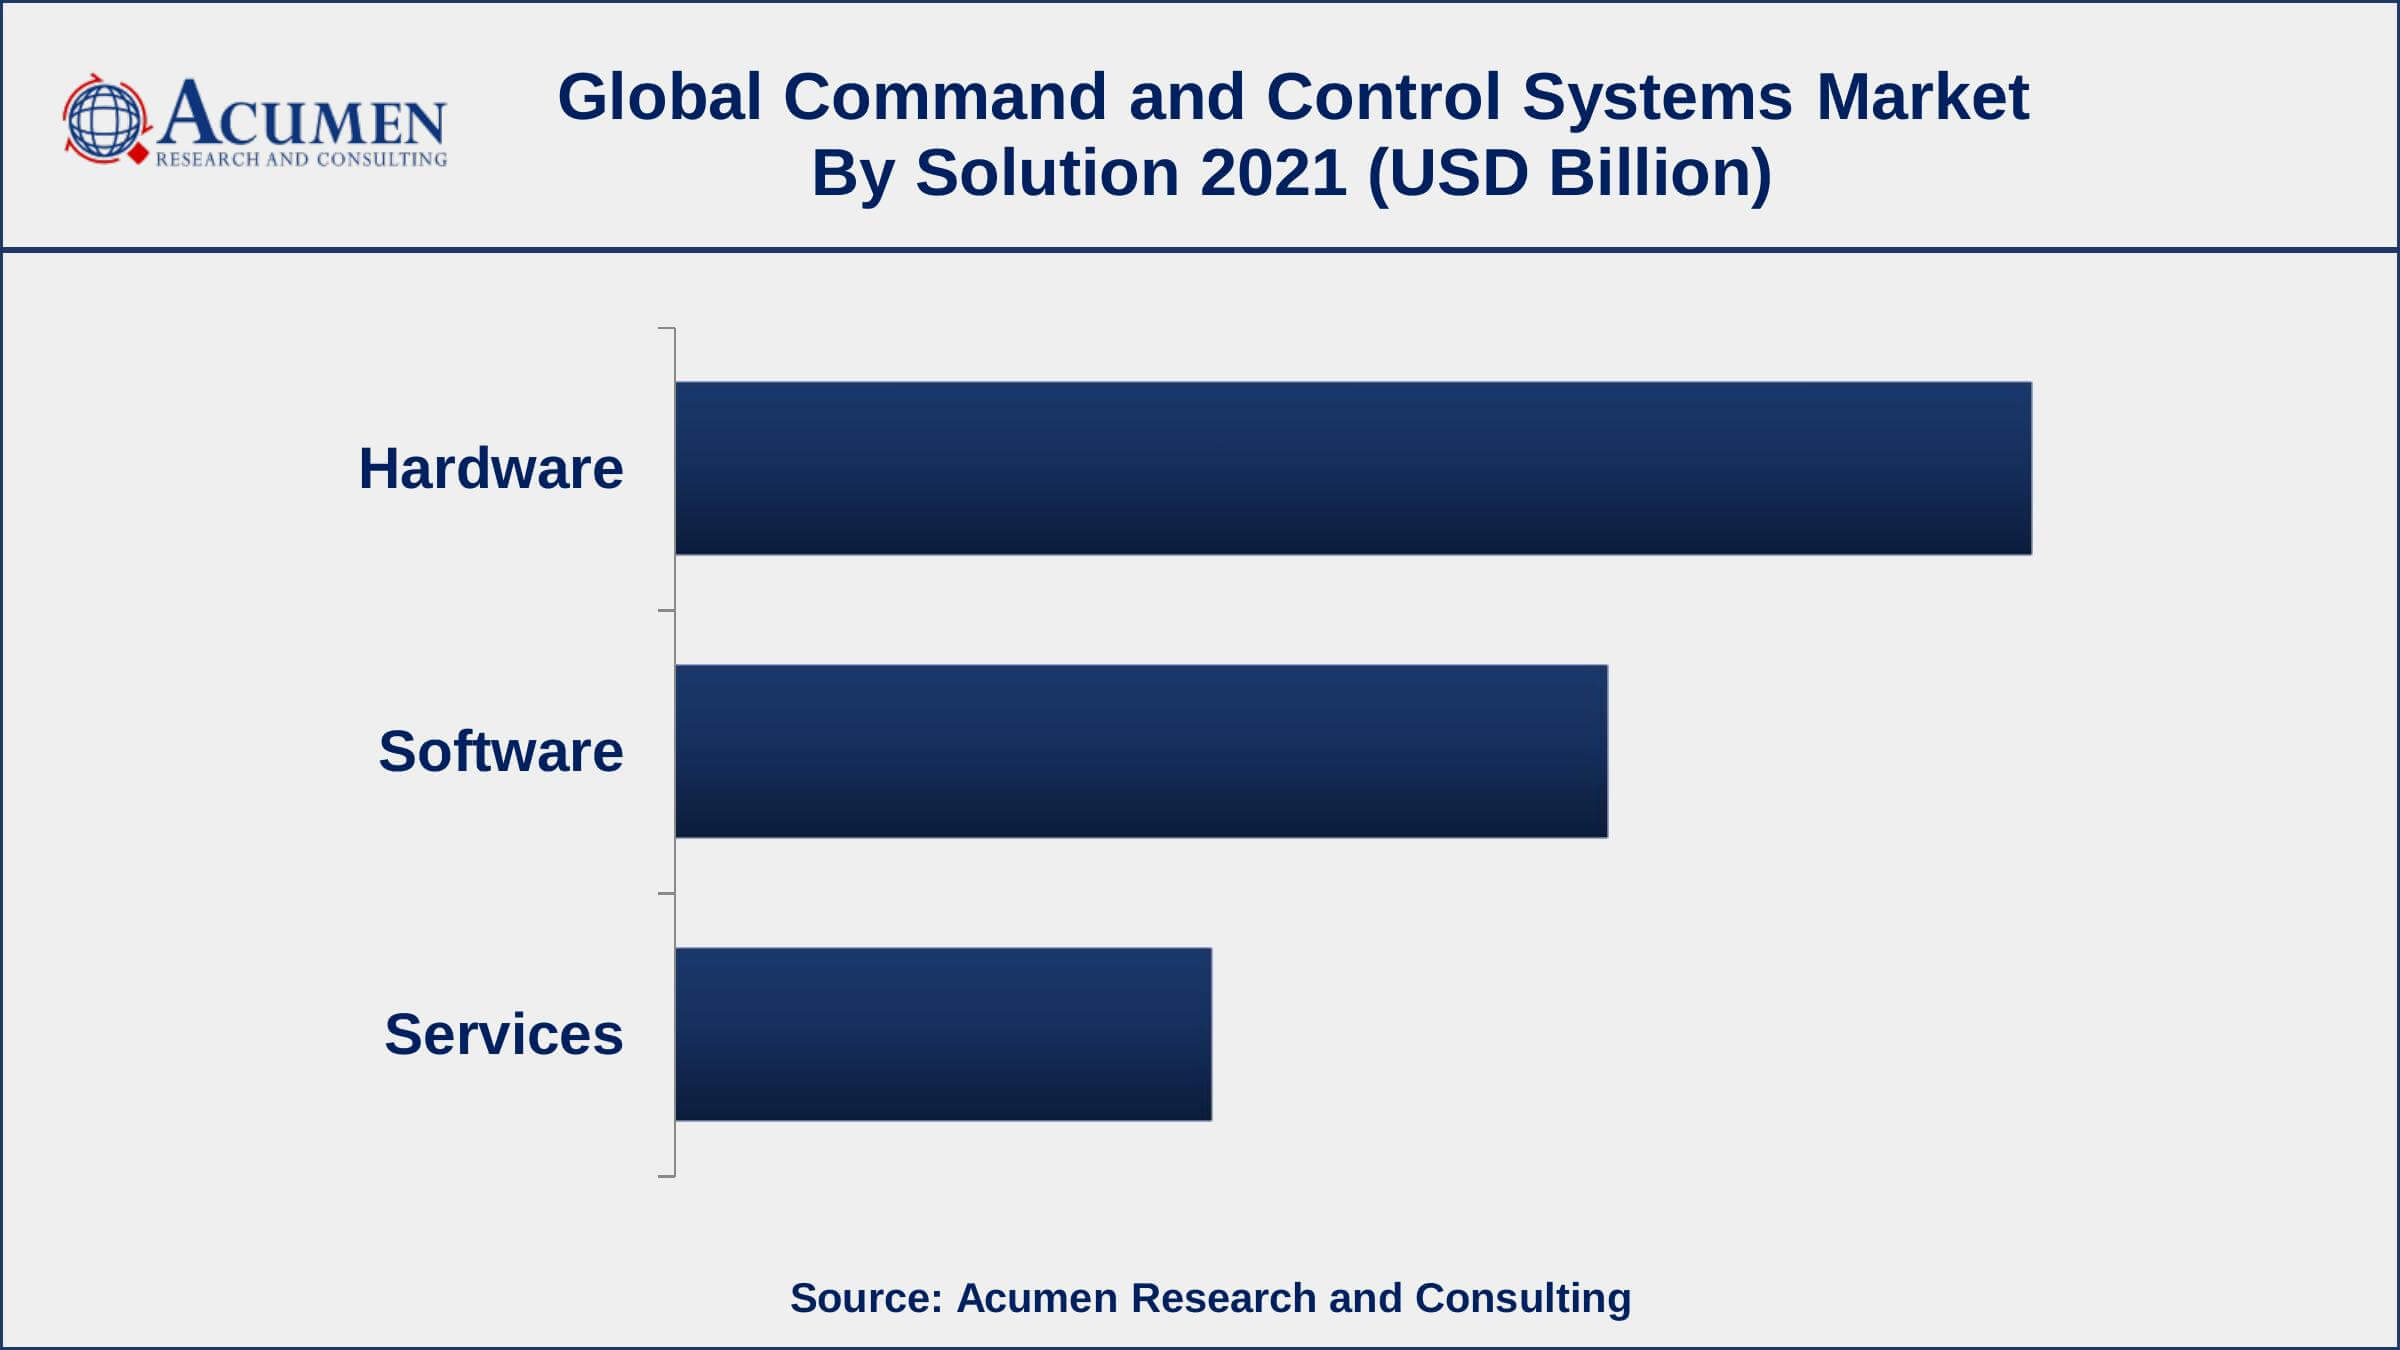 By solution, the hardware segment has accounted market share of over 48% in 2021